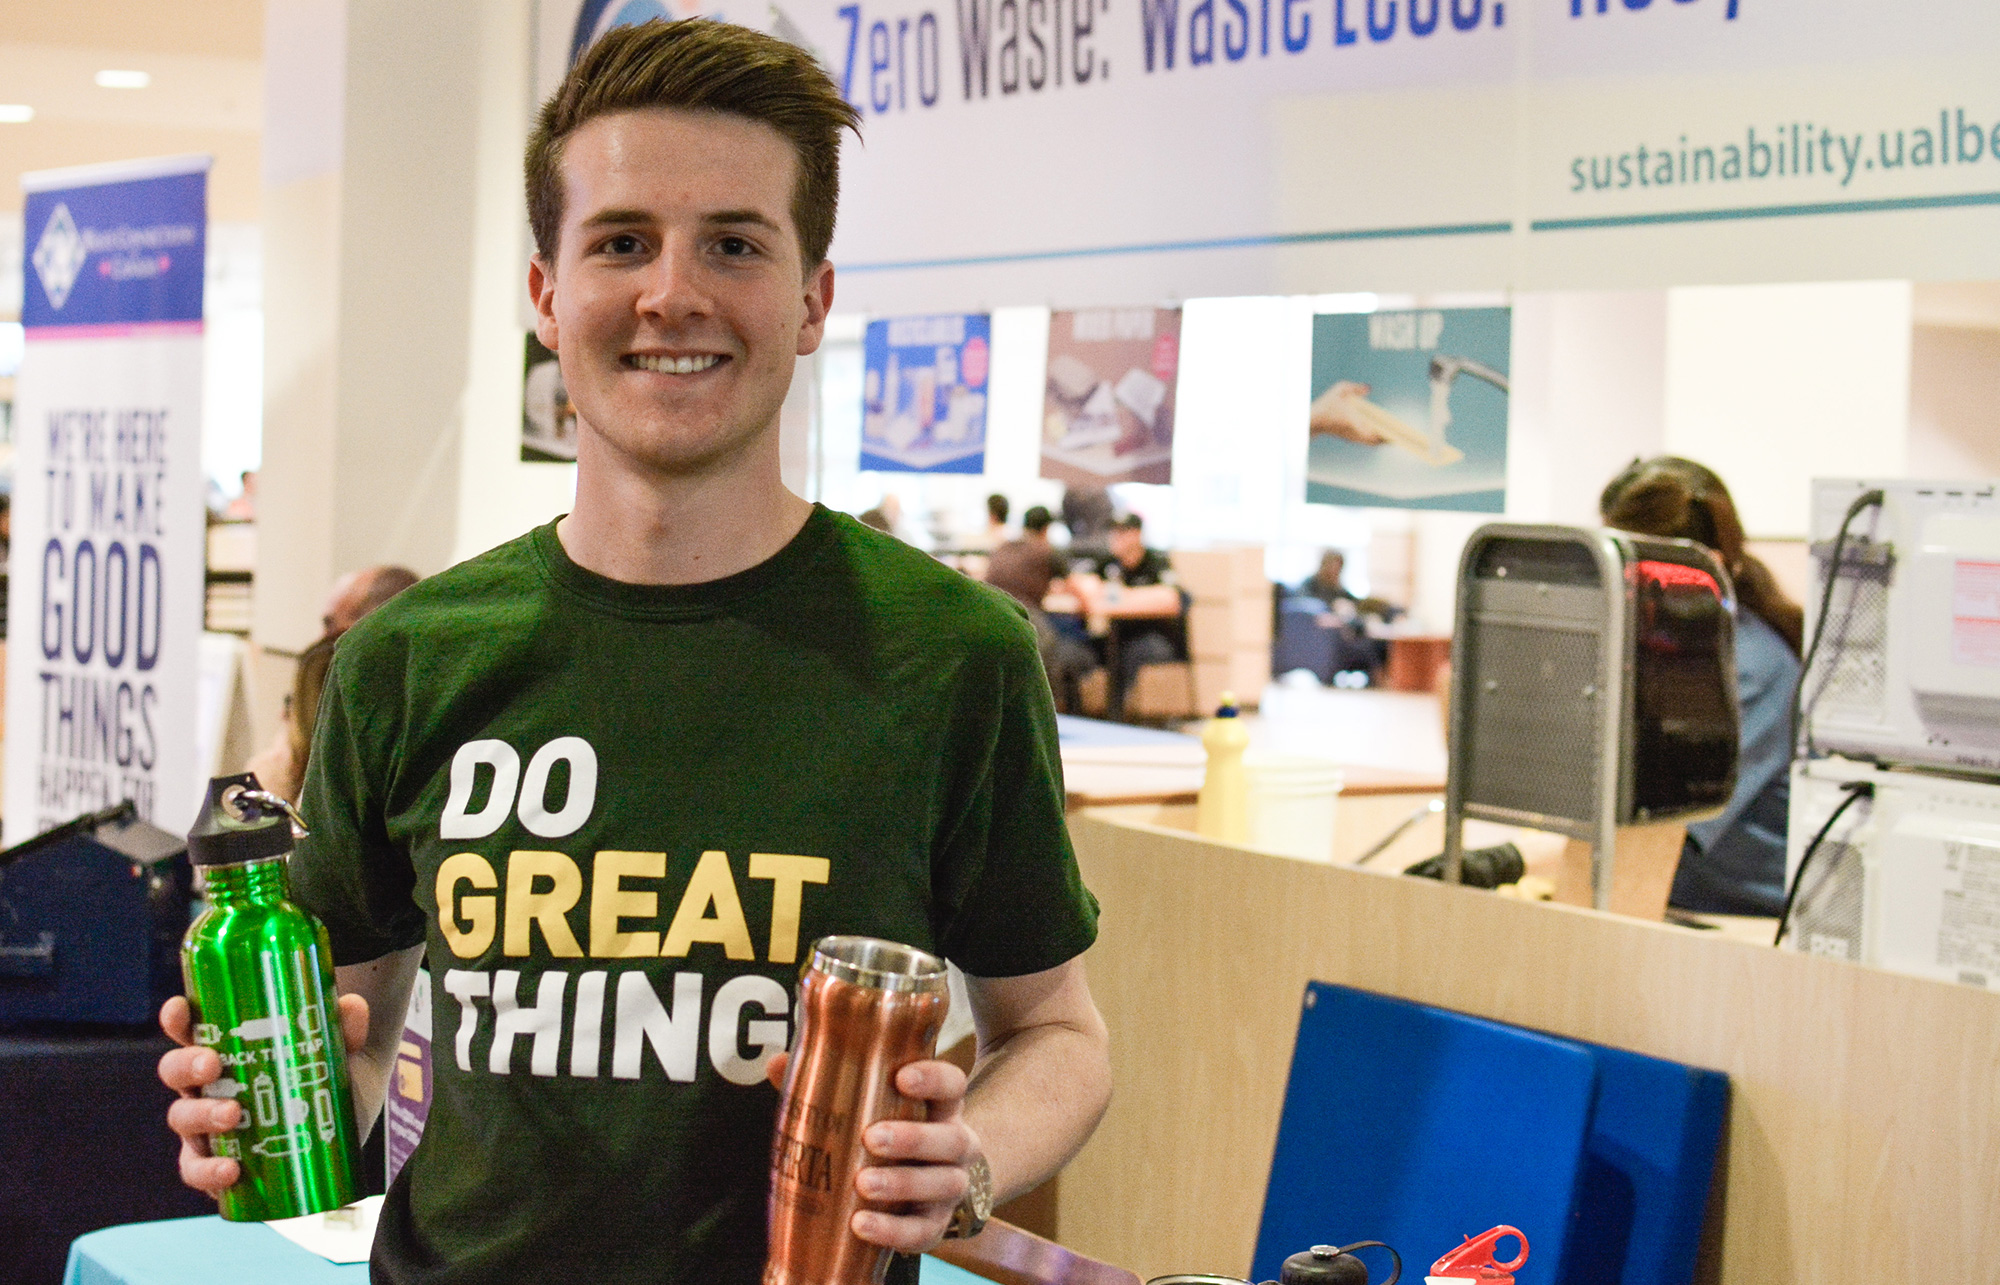 Student volunteer holding Sustainability Council merchandise and smiling at the camera